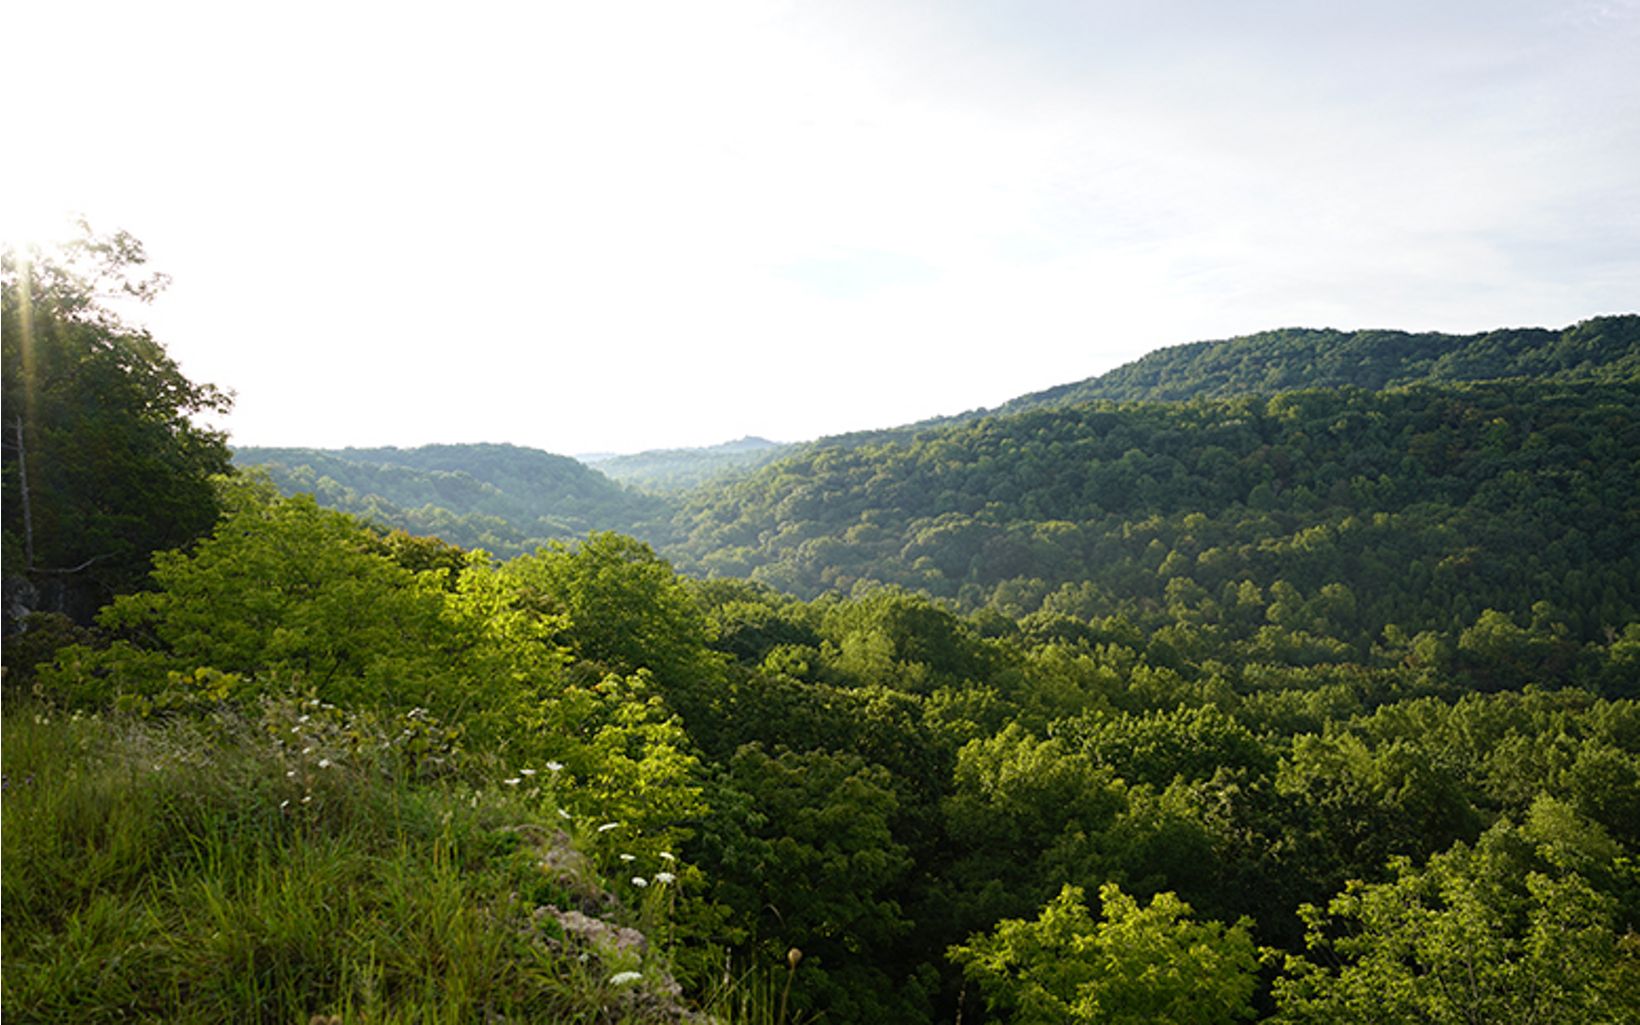 Lush green forests covering hillsides seen from an overlook.